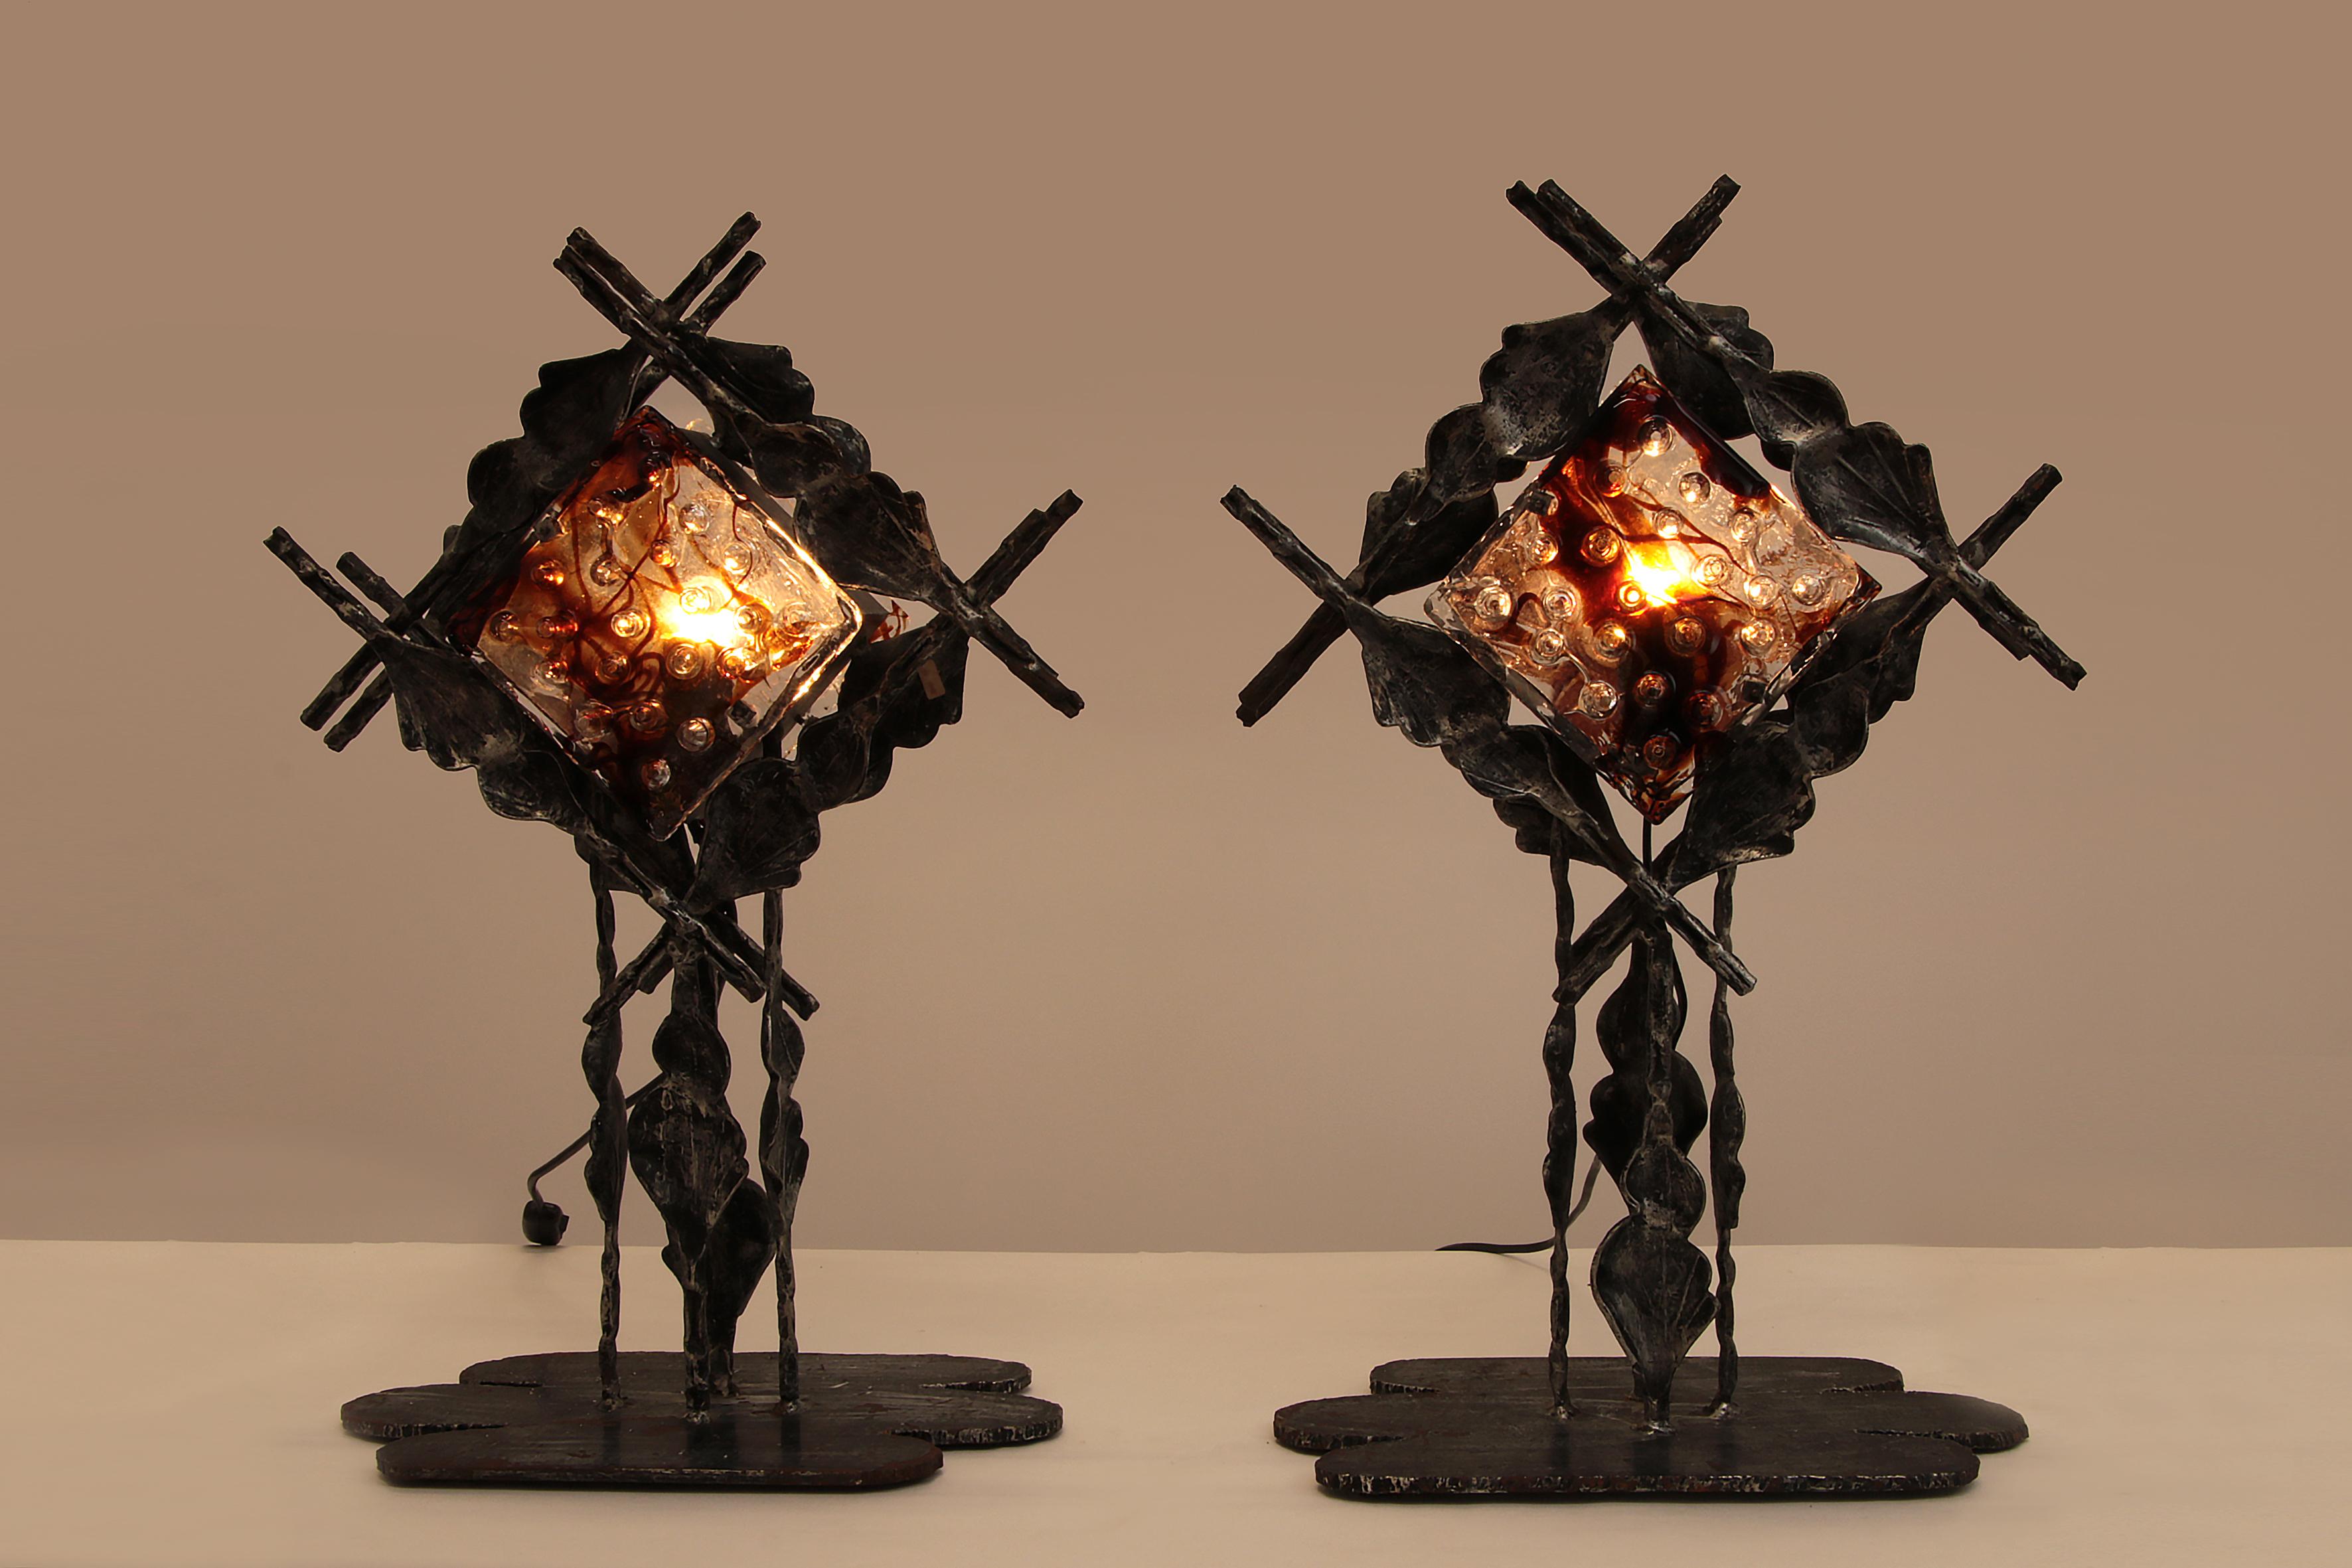 Italian Design Brutalist Table Lamps from Poliarte, Albano Poli, 1970s For Sale 8